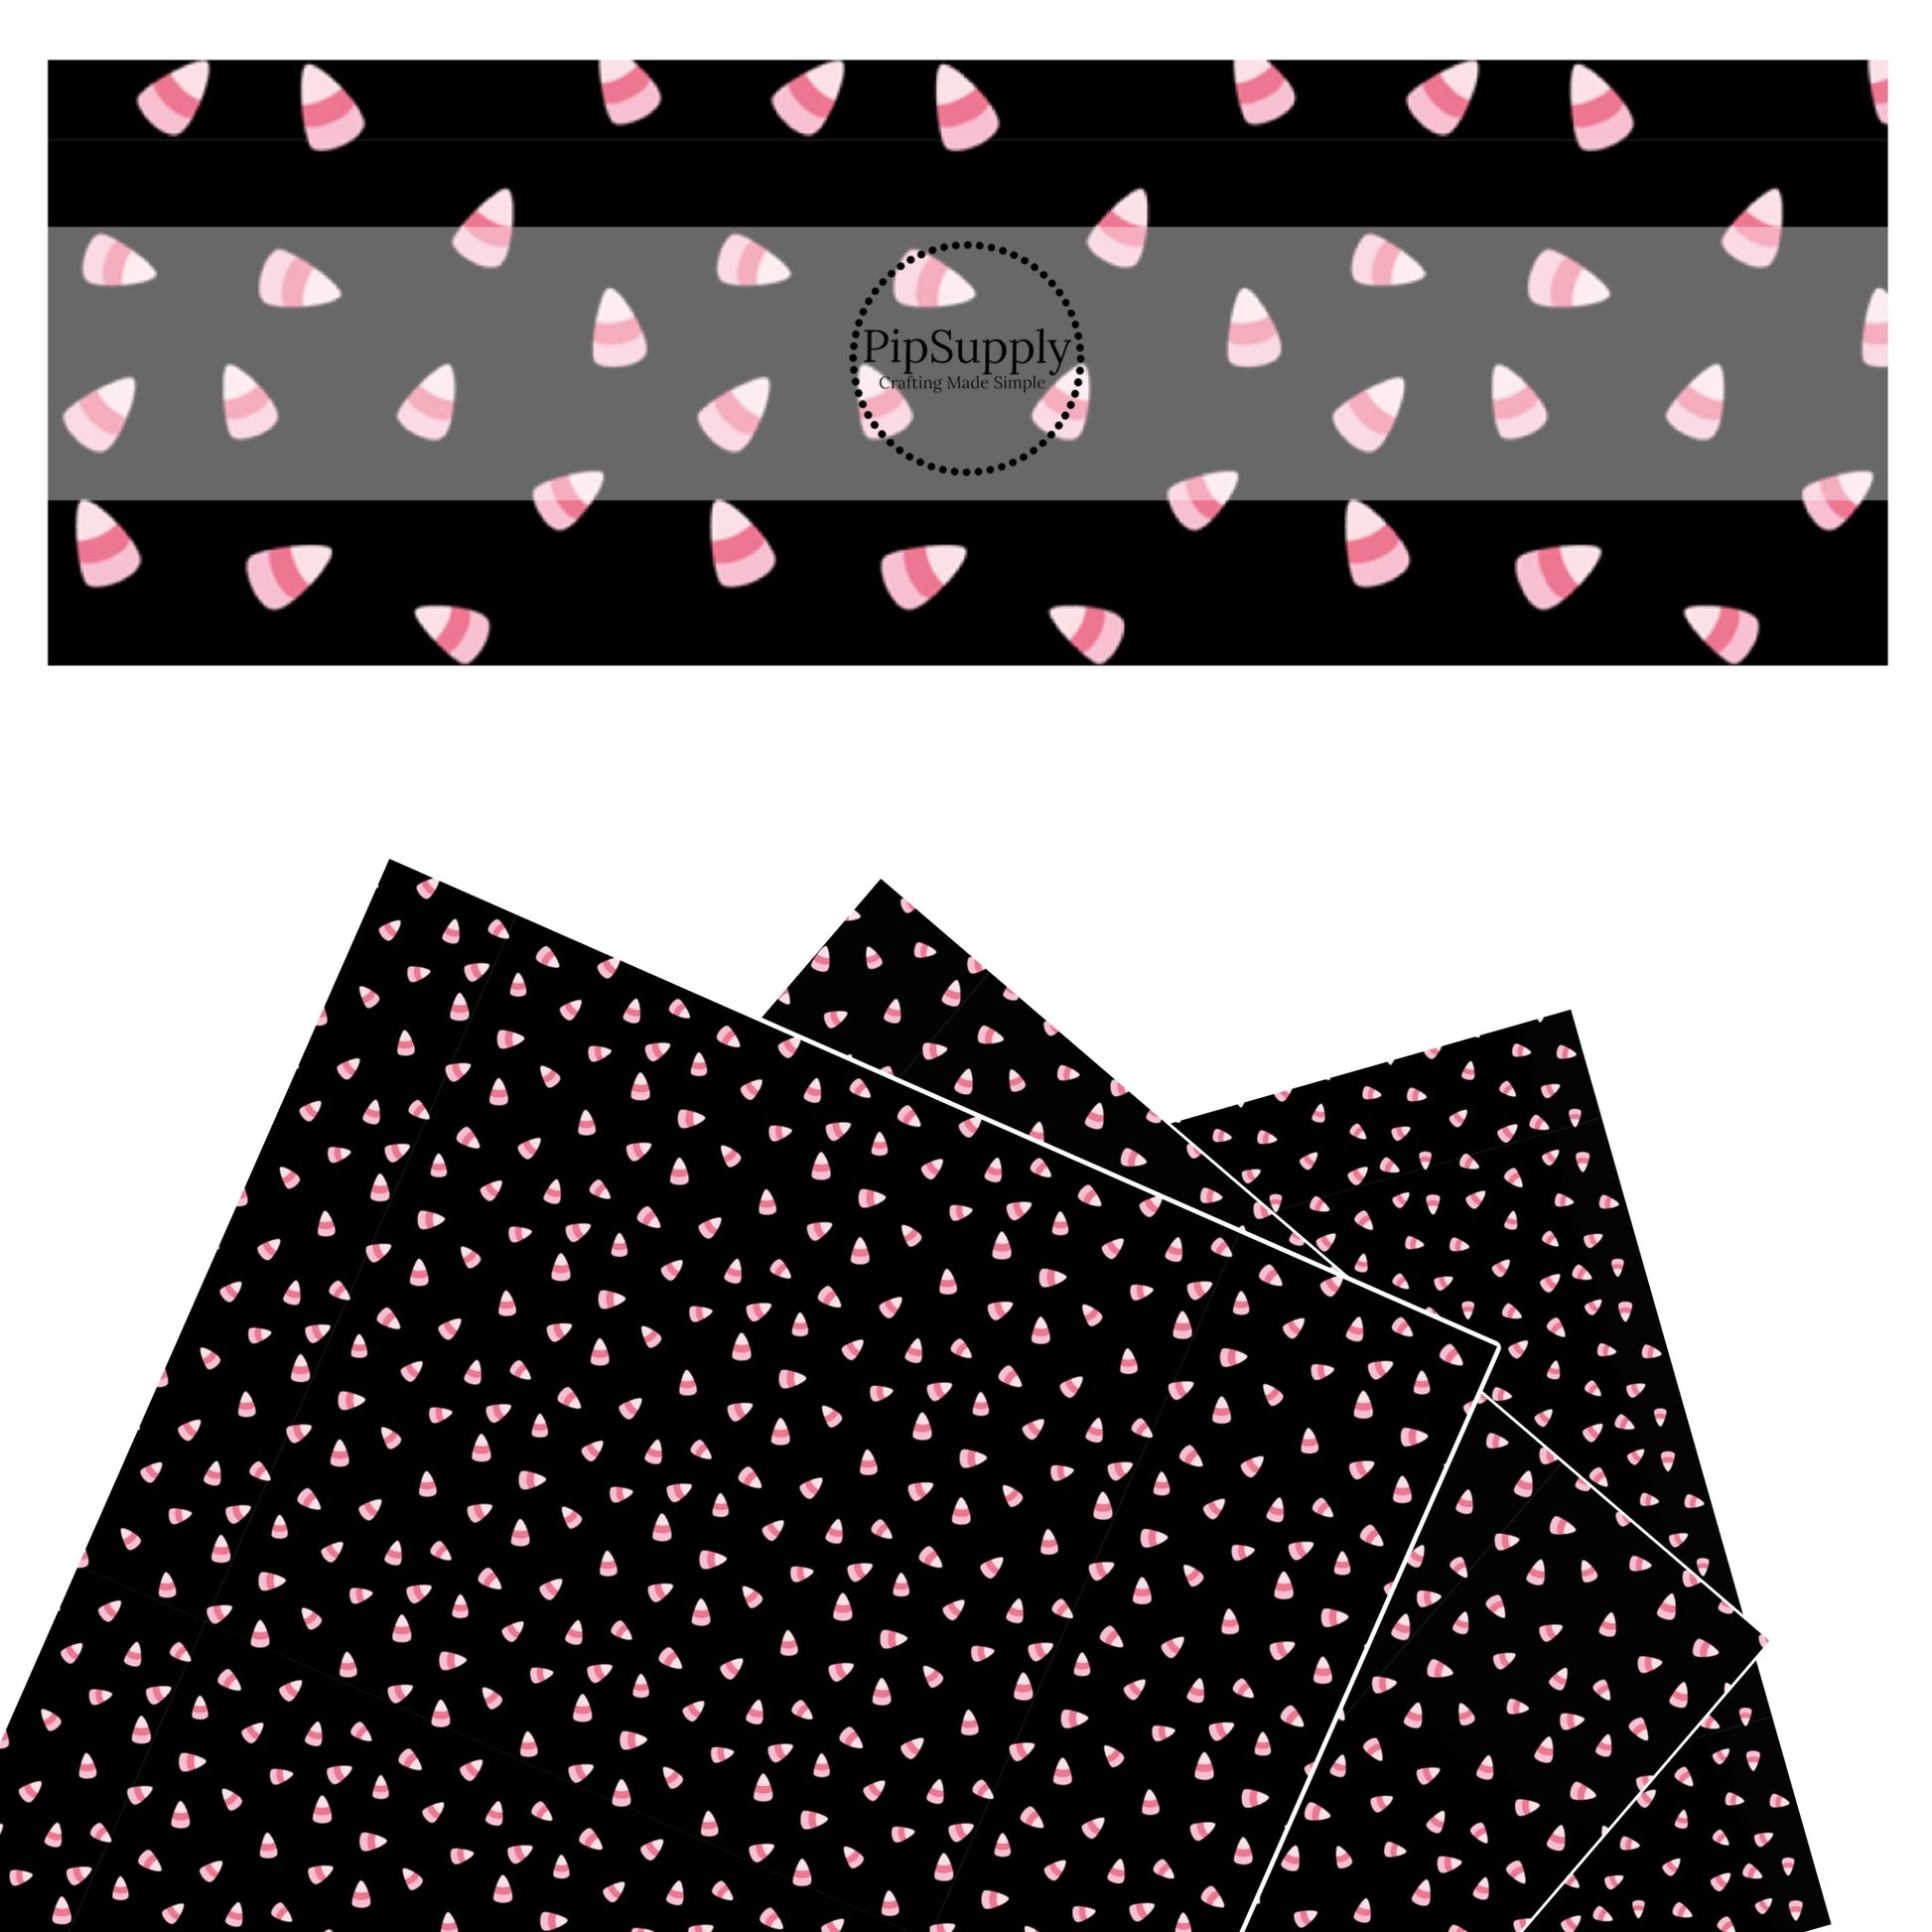 Pink candy corn scattered on black faux leather sheets